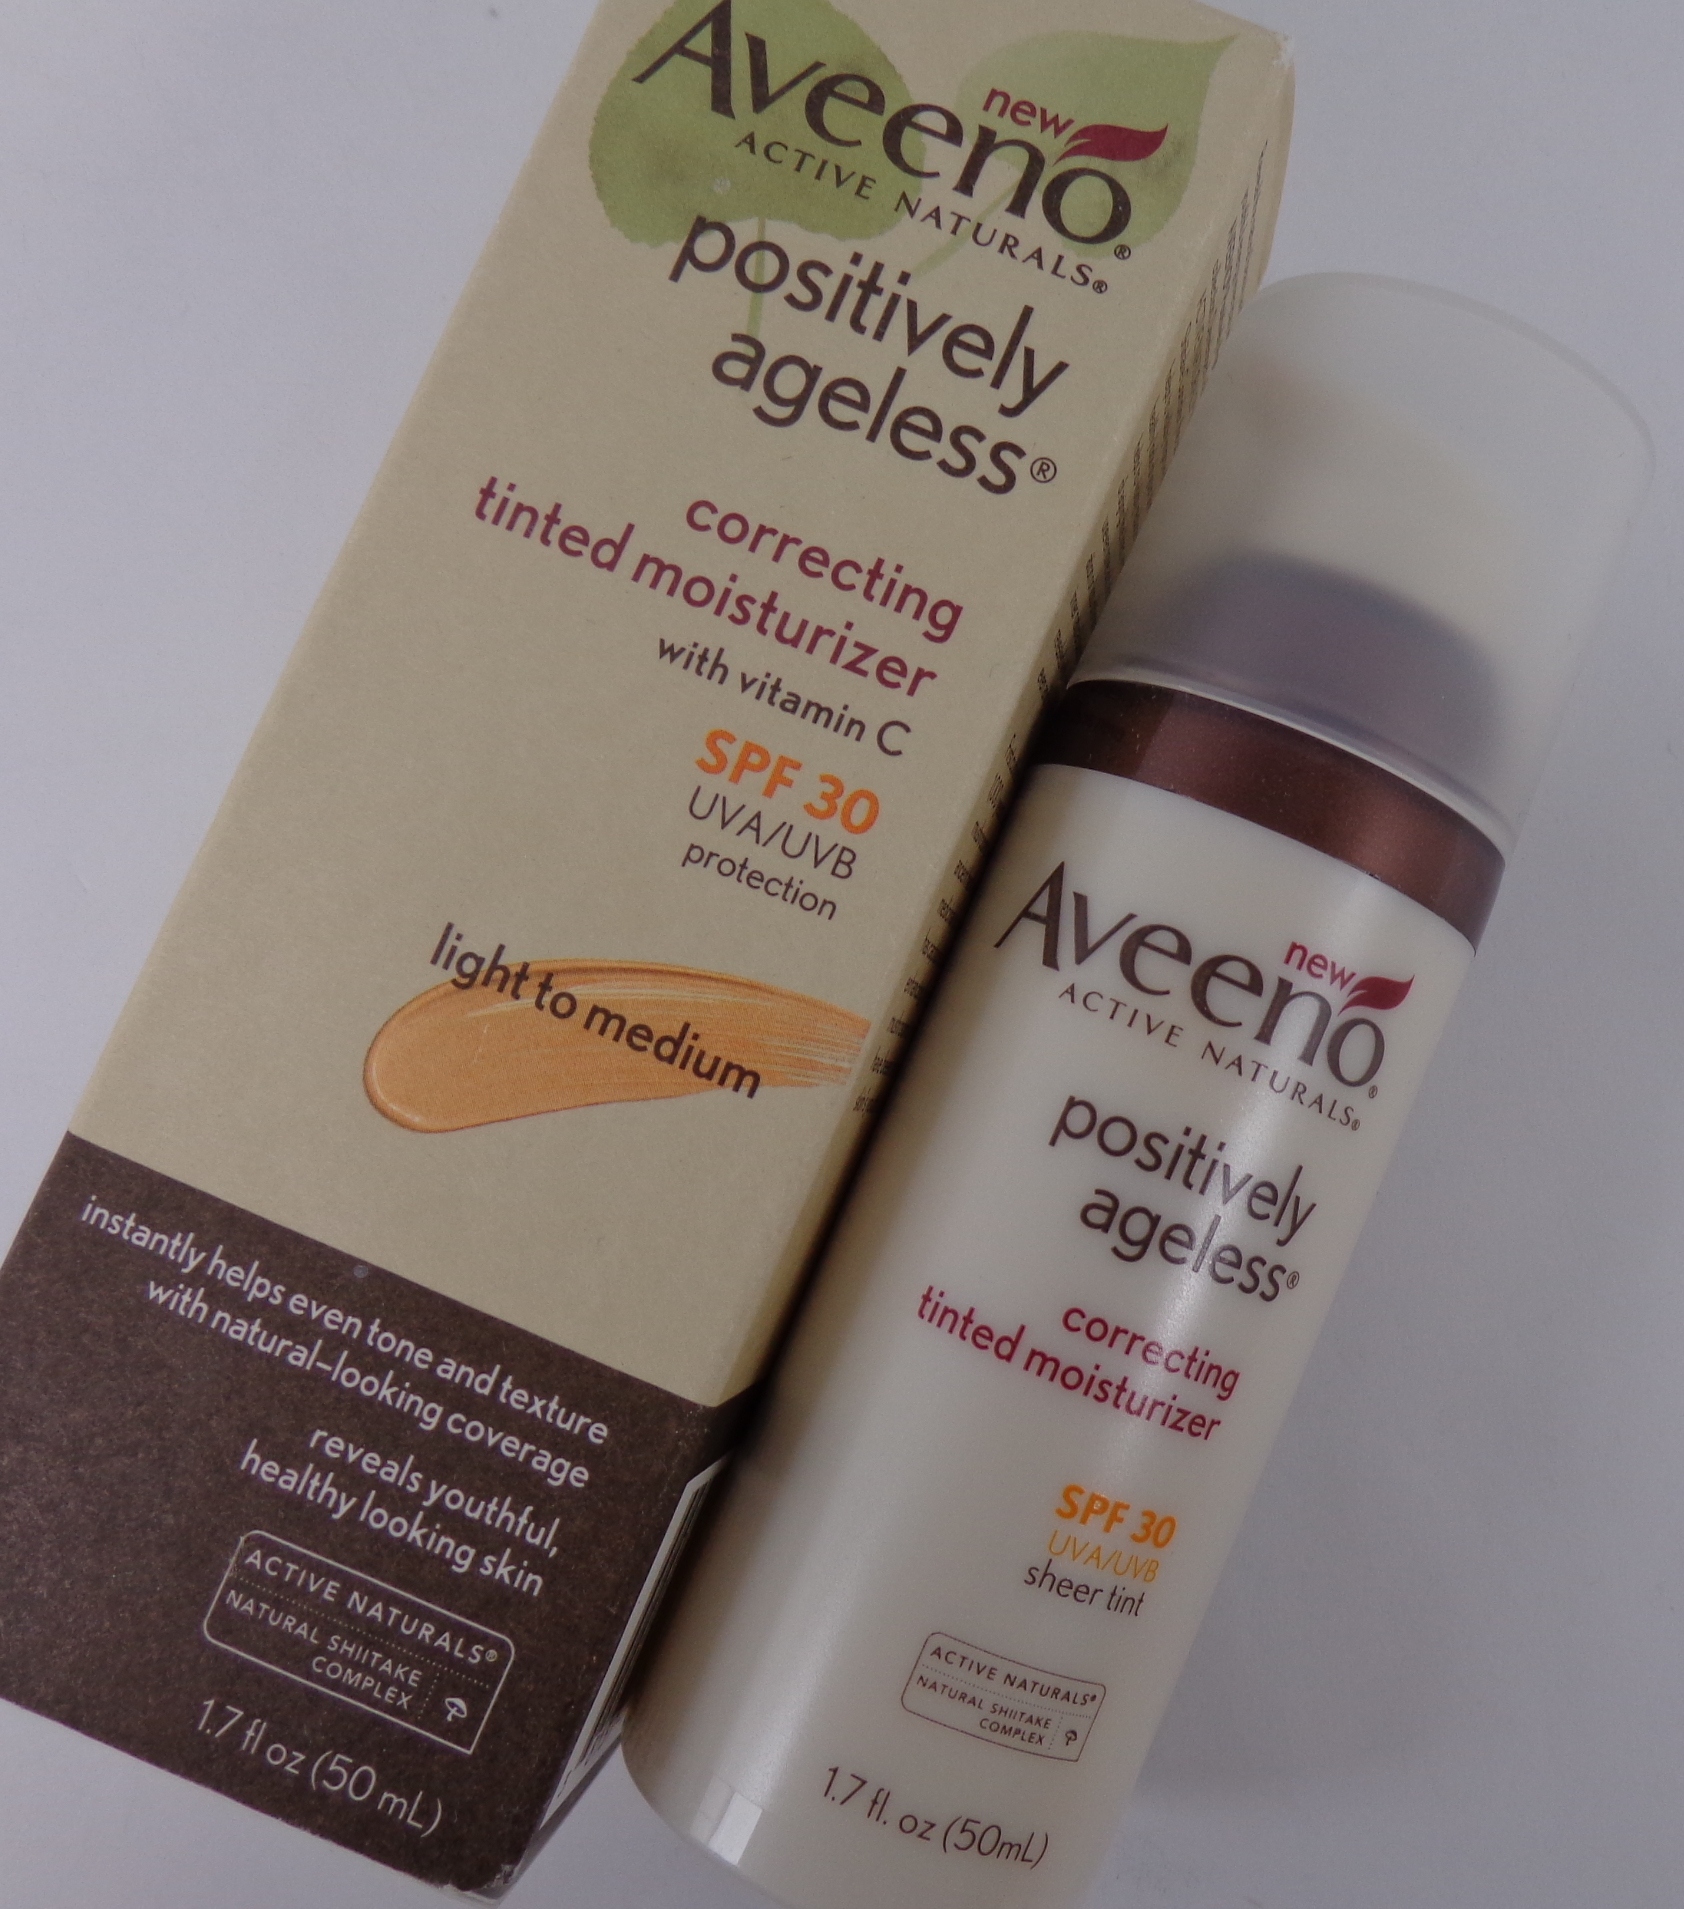 Review: Aveeno Positively Ageless Correcting Tinted Moisturizer - My Highest Self